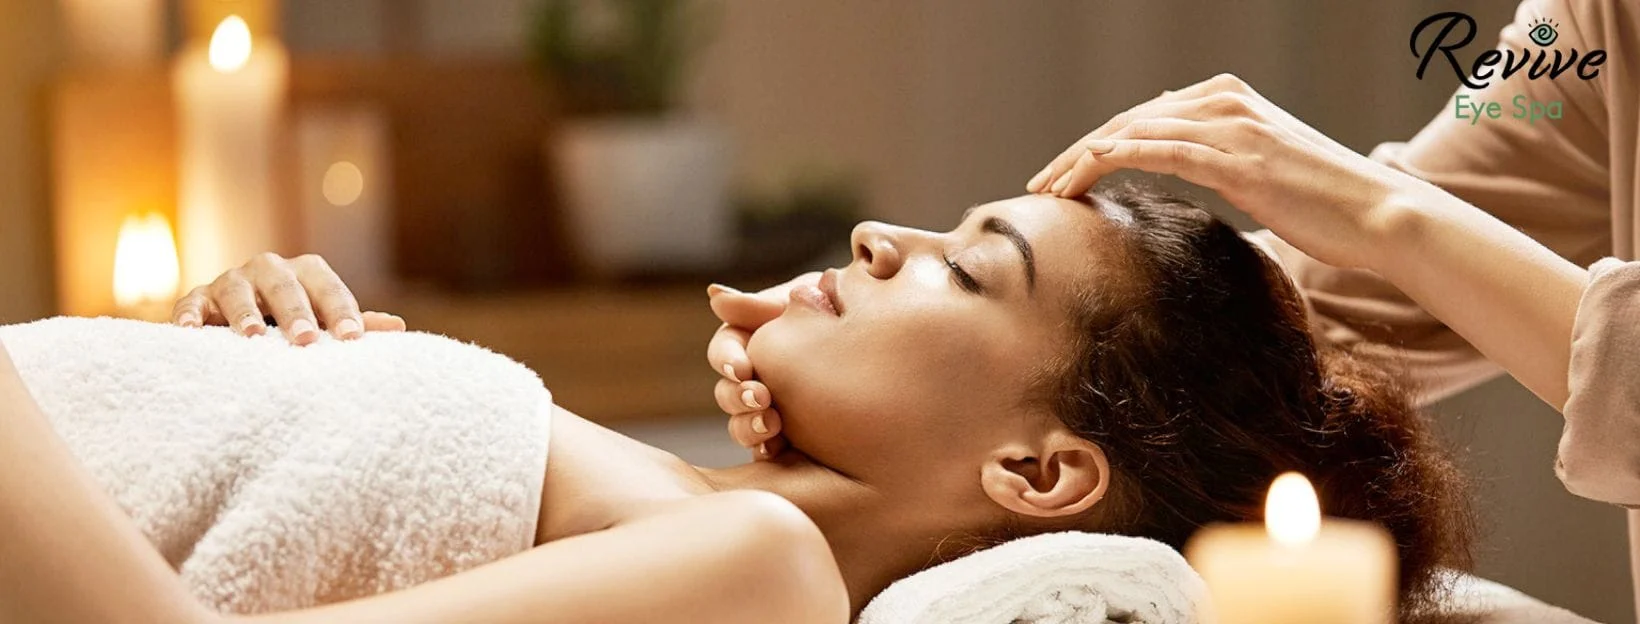 ​Relax with a facial at Revive Eye Spa